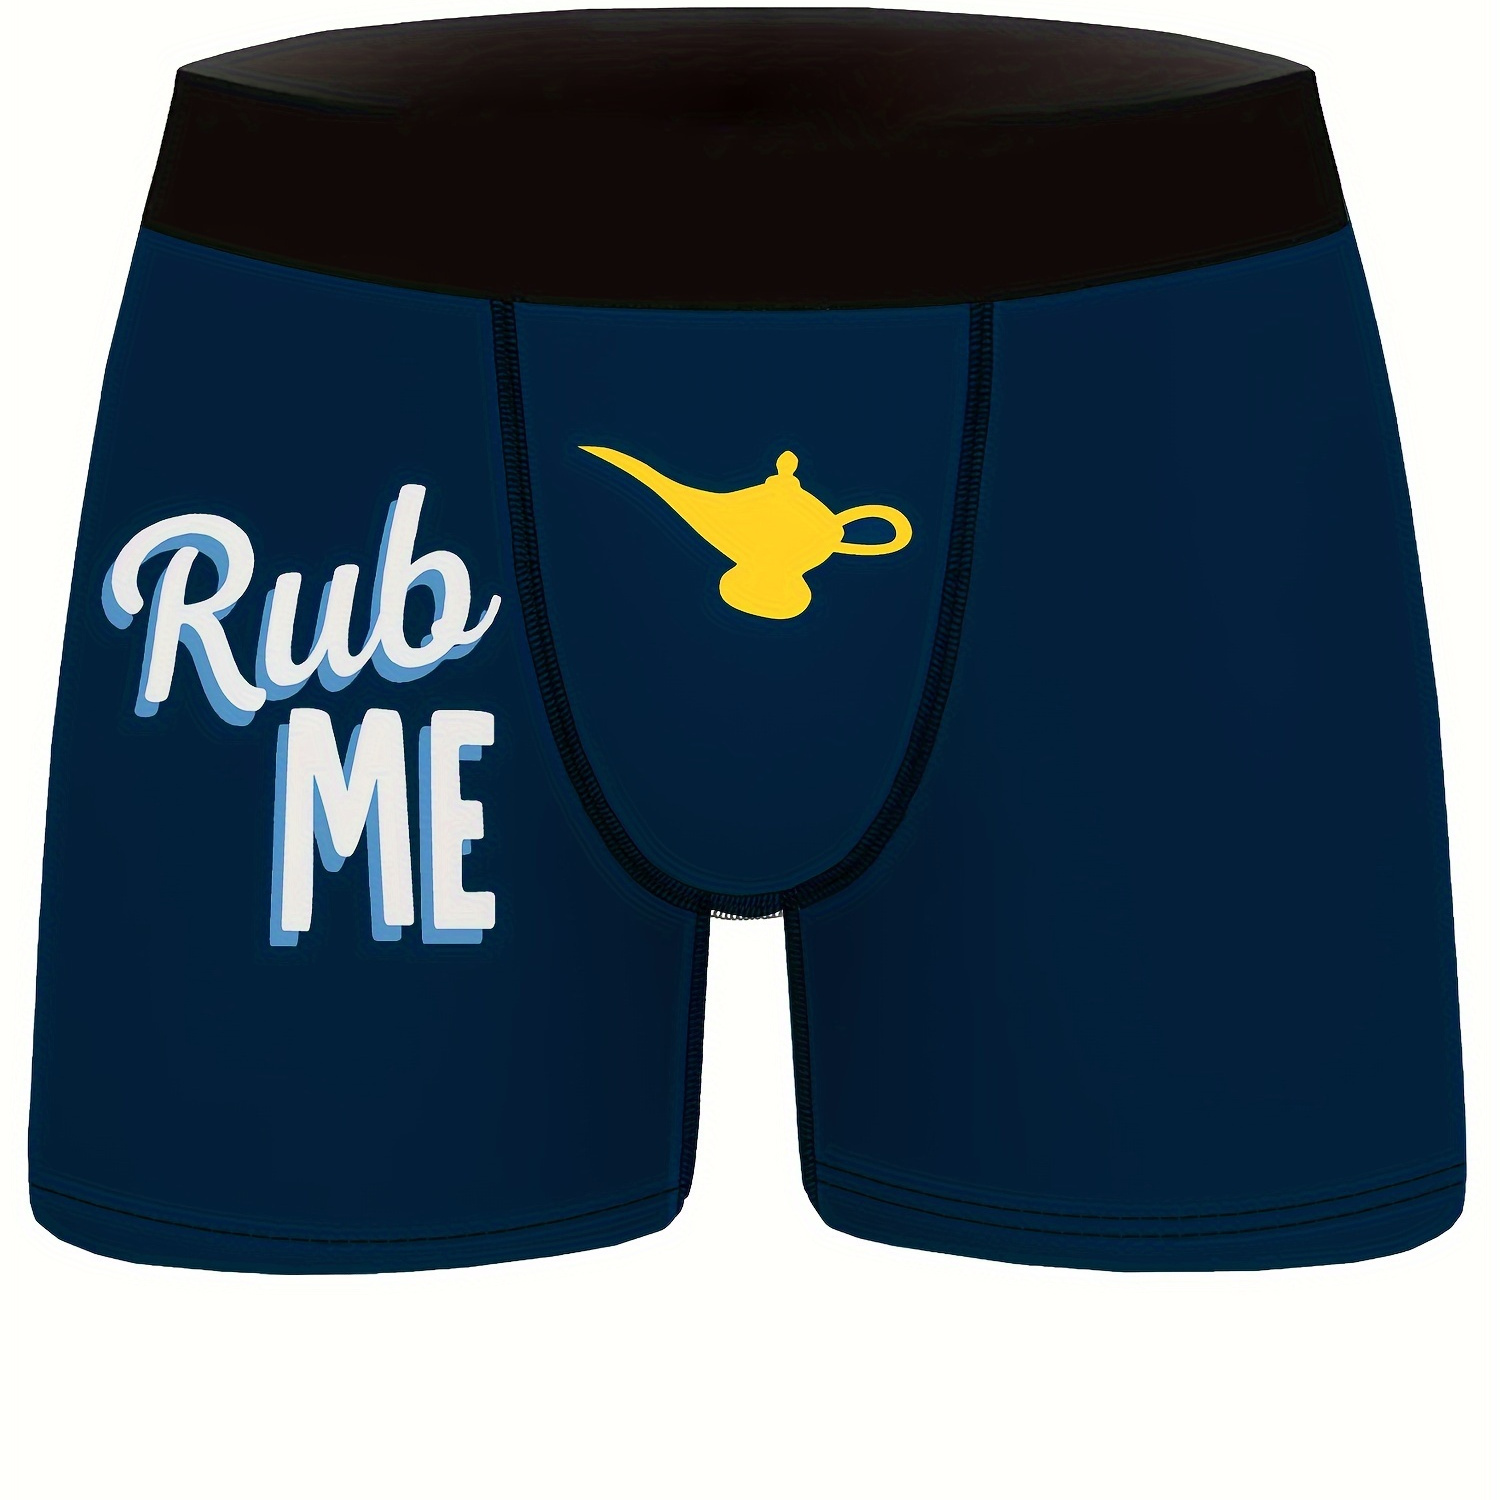 Keep Rubbing You Just Might Get Your Wish' All Over Print Men's Novelty  Funny Underwear, Breathable Comfy High Stretch Boxer Briefs Shorts, Swim  Trun